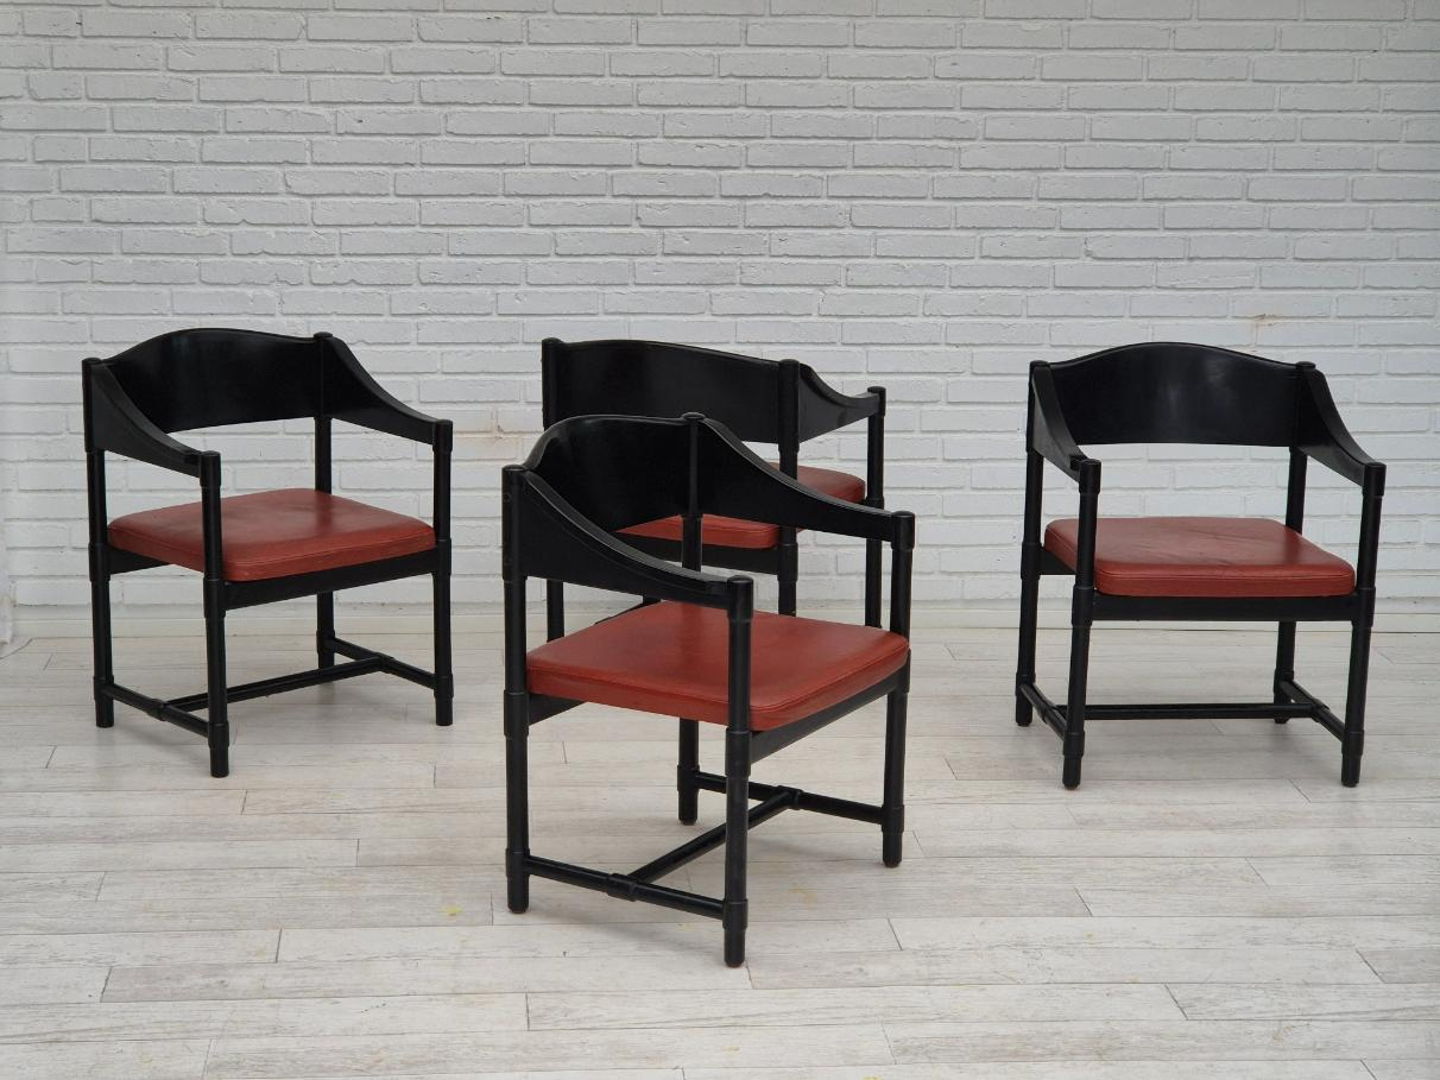 1970s, set of 4 Finnish armchairs by Lepokalusto, original condition, birch wood, leather.